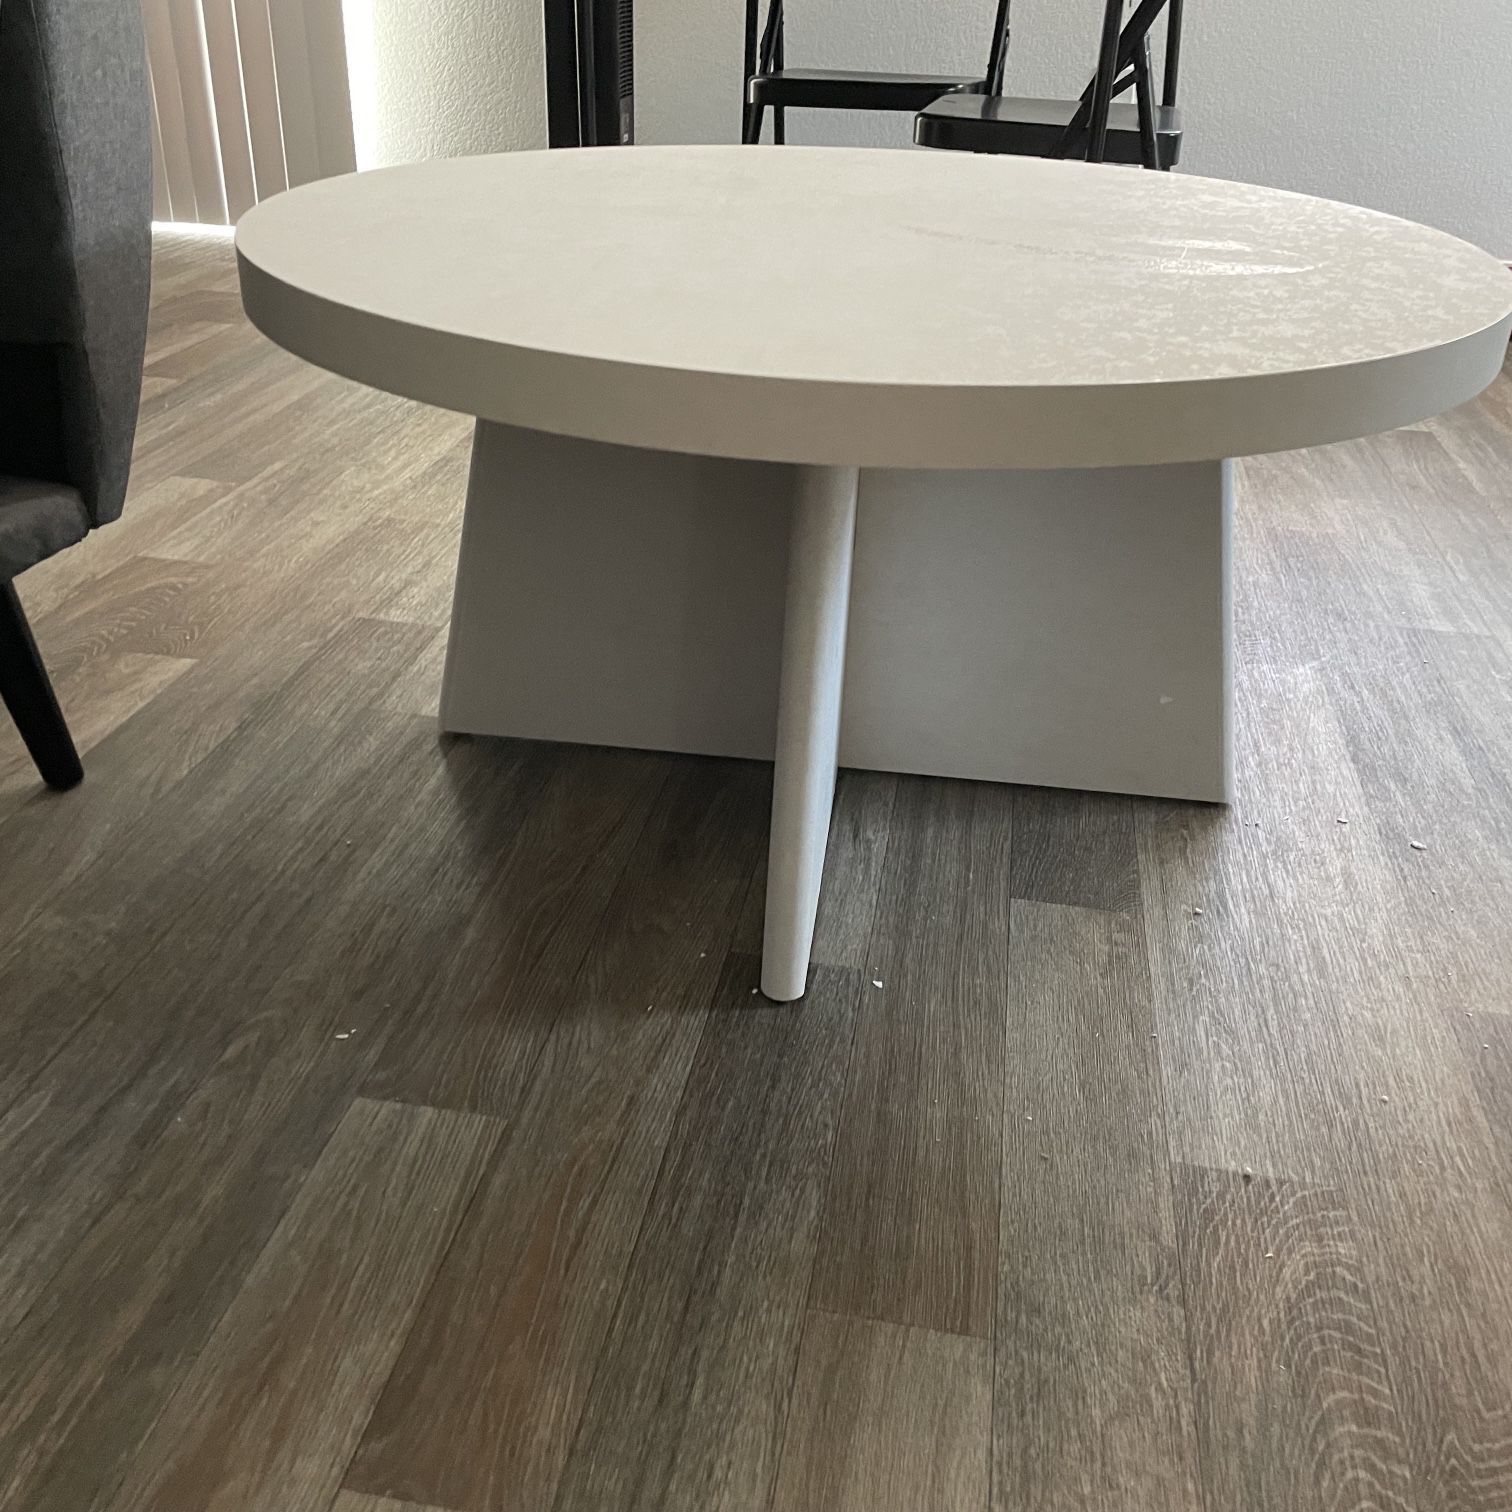 Queer Eye Liam Round Coffee Table For Sale In North Las Vegas, Nv – Offerup Throughout Liam Round Plaster Coffee Tables (Photo 12 of 15)